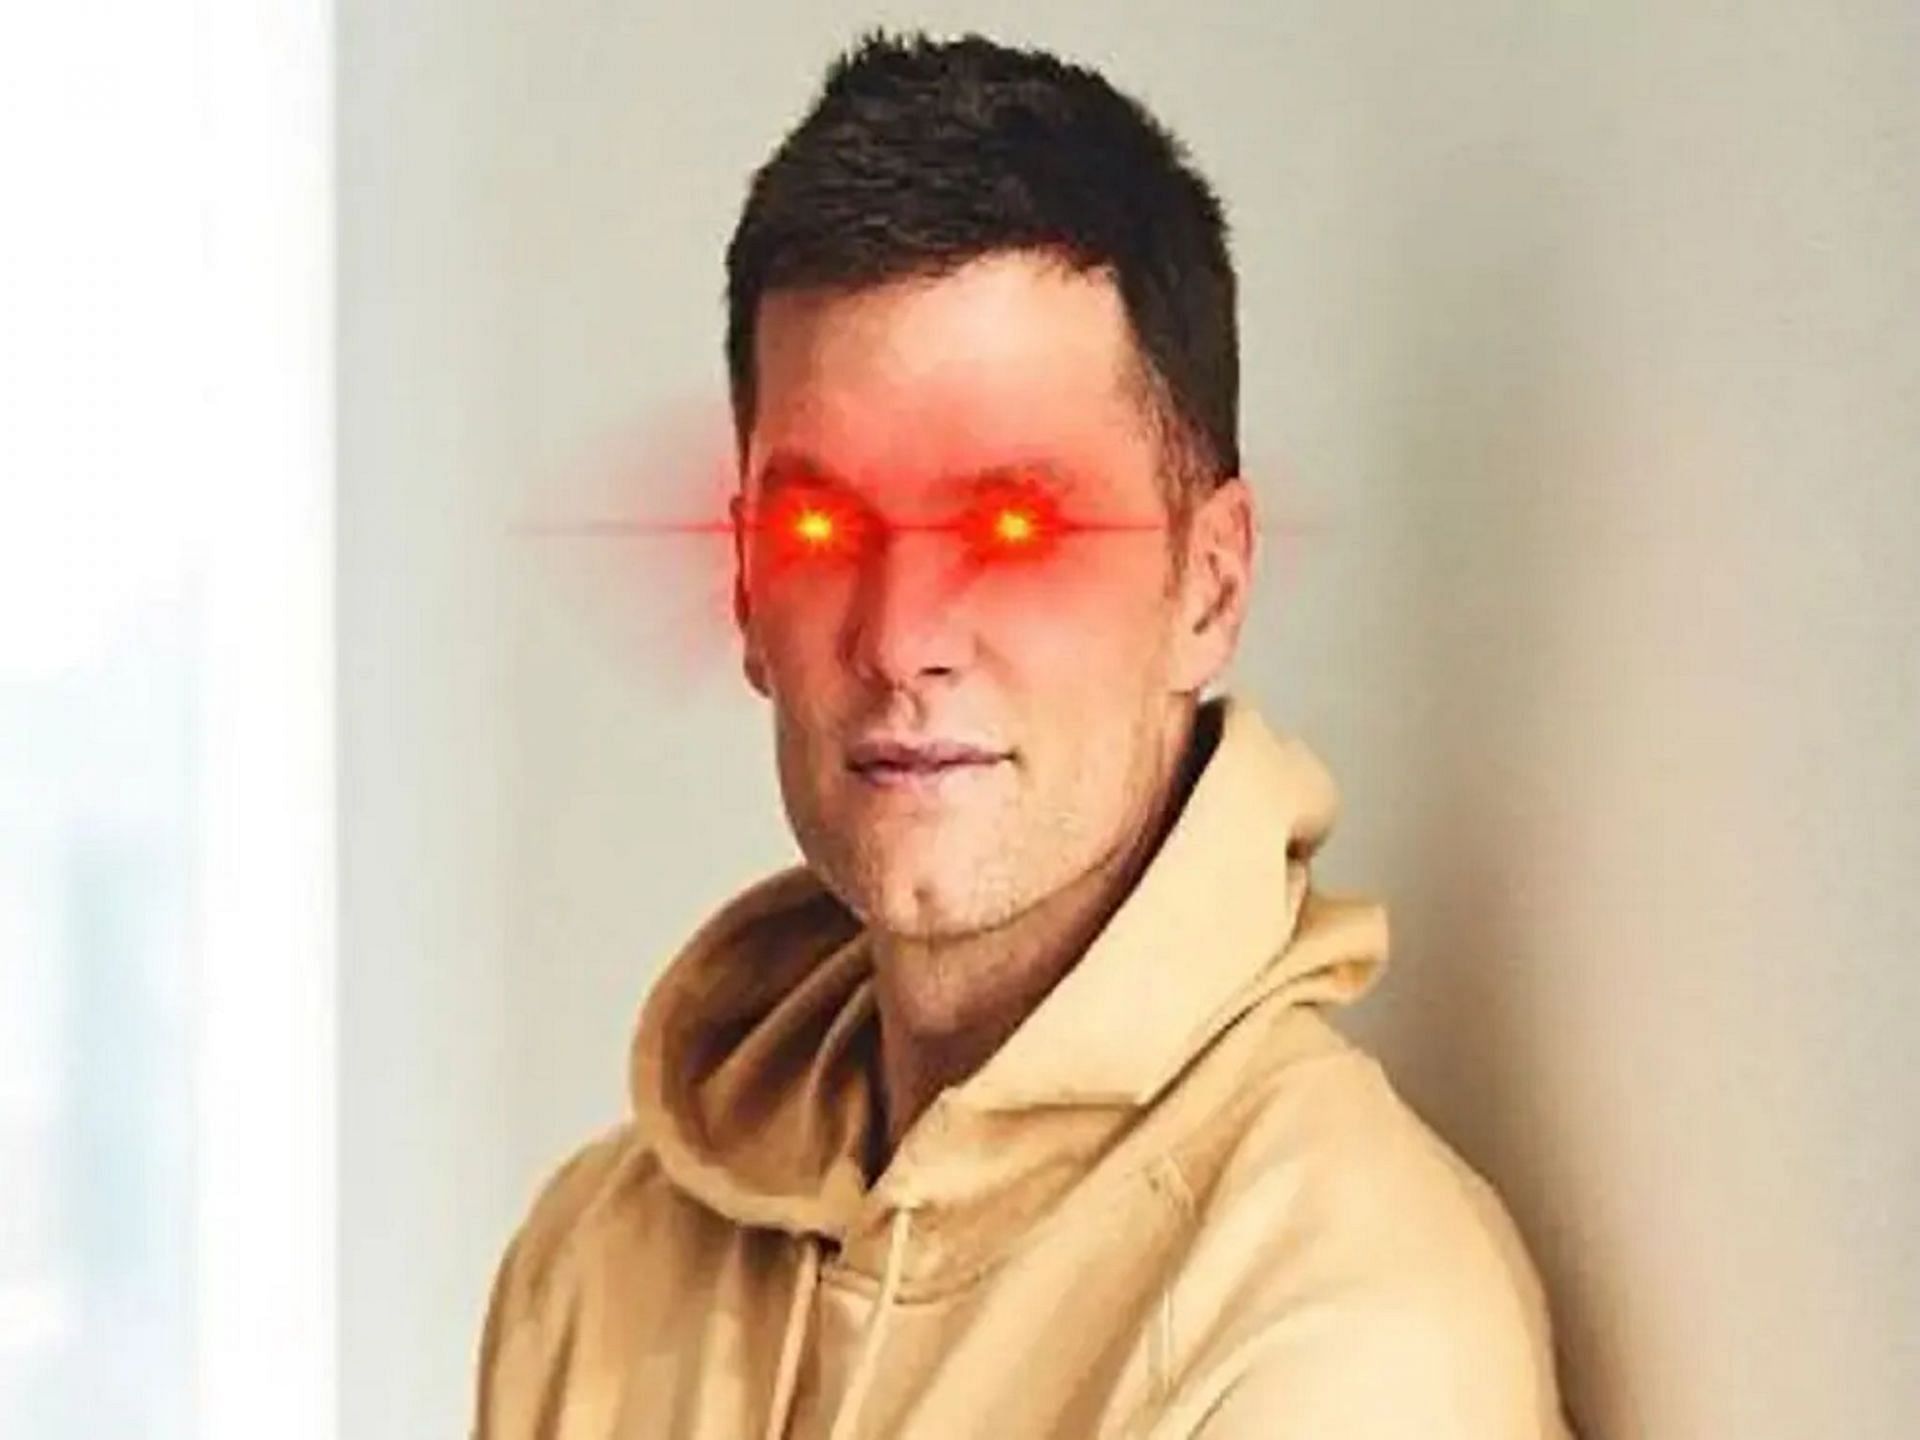 Tom Brady with red laser eyes - Courtesy of Twitter